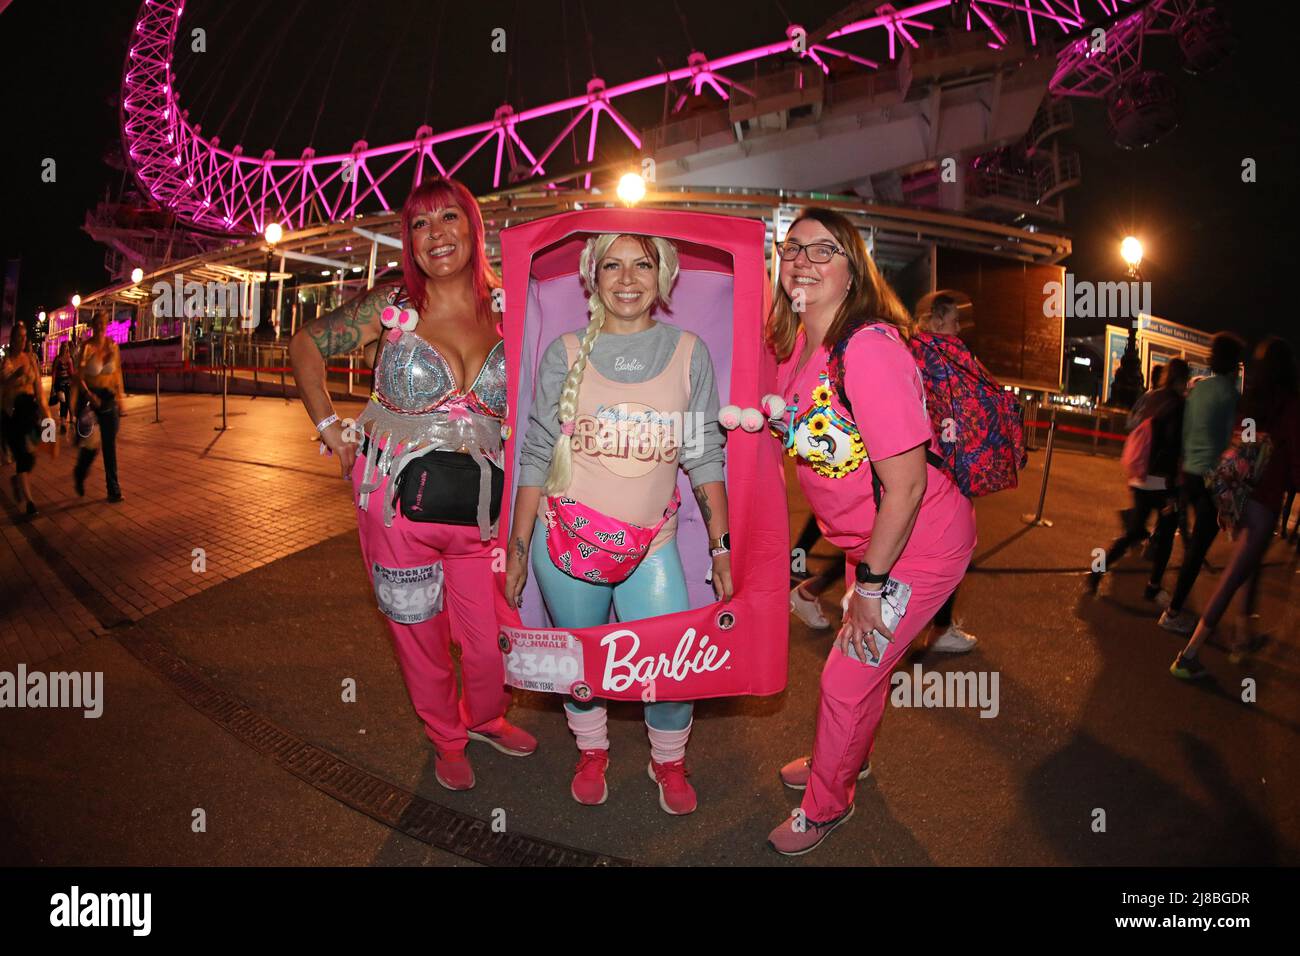 London, UK. 14th May 2022. London, UK. Participant dressed as her hero Barbie, complete with box at the Walk the Walk Moonwalk walking through London wearing decorated bras fundraising for breast cancer charities doing a marathon overnight. This year the theme is 'Your Heroes' and there were numerous rainbow themed costumes and bras in support of NHS heroes, also many superhero costumes and even blue and yellow Ukranian flag themed costumes in support of Ukrainian heroes. Credit: Paul Brown/Alamy Live News Stock Photo